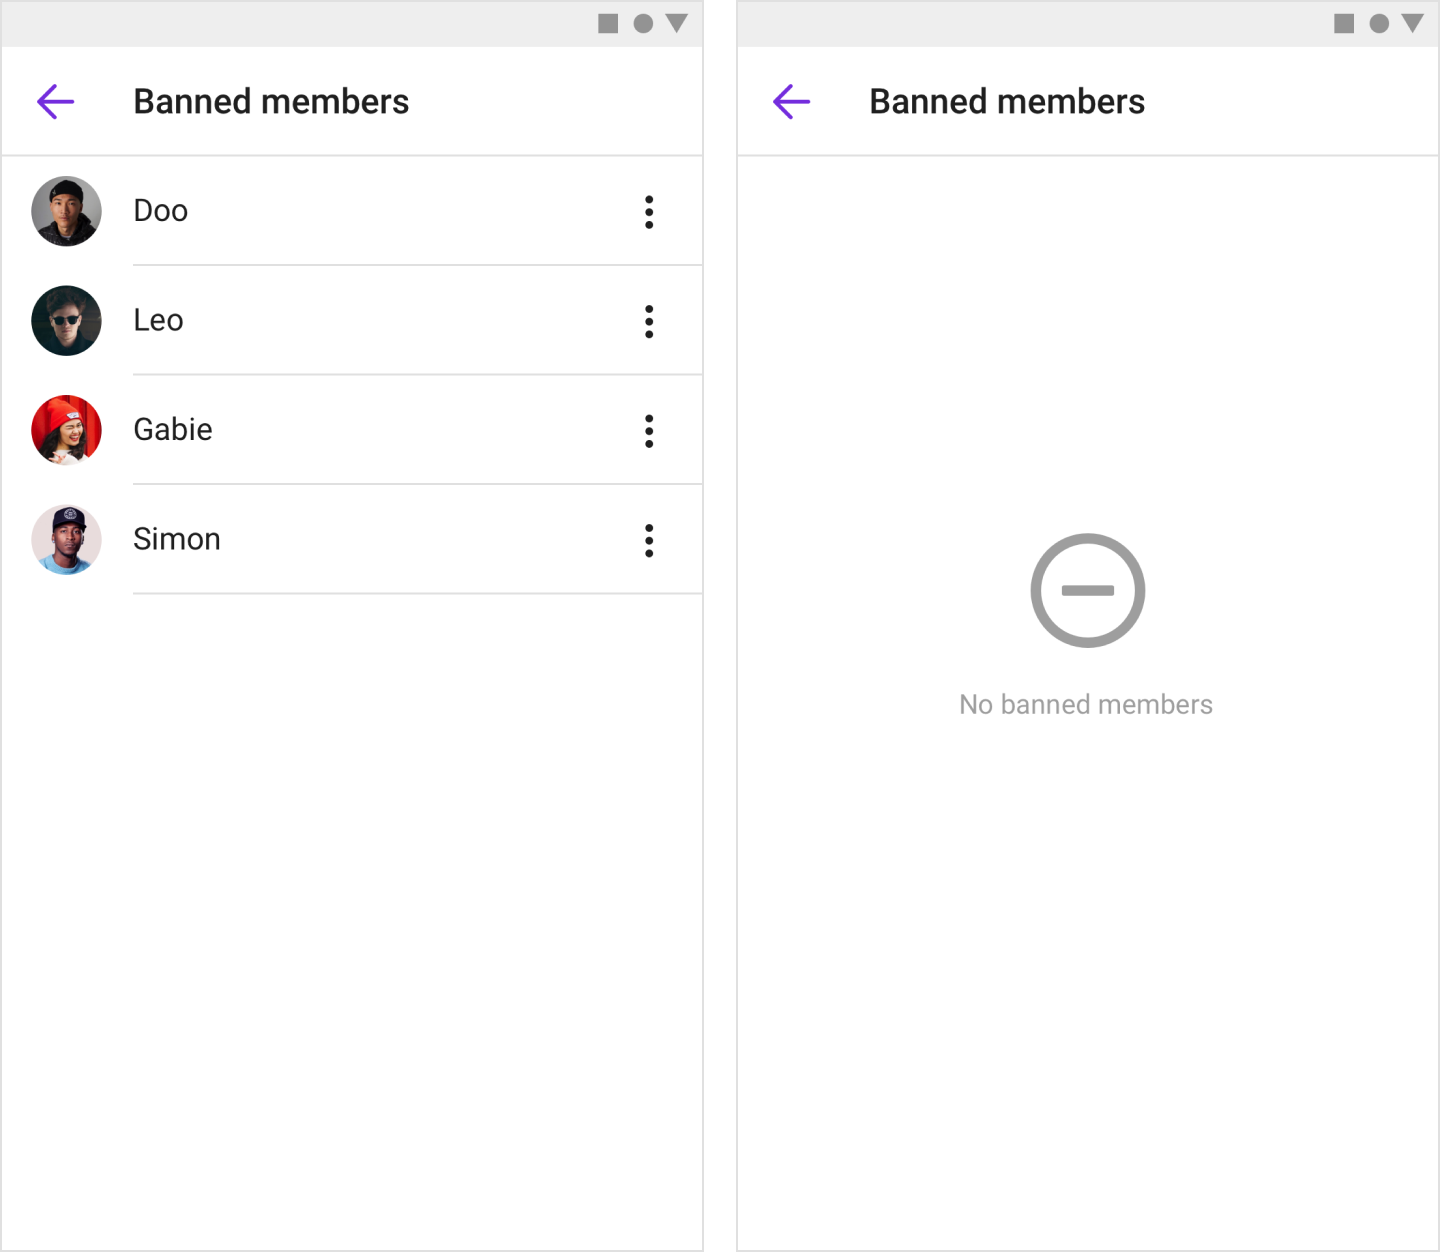 Image|Banned member list screen showing all the components.